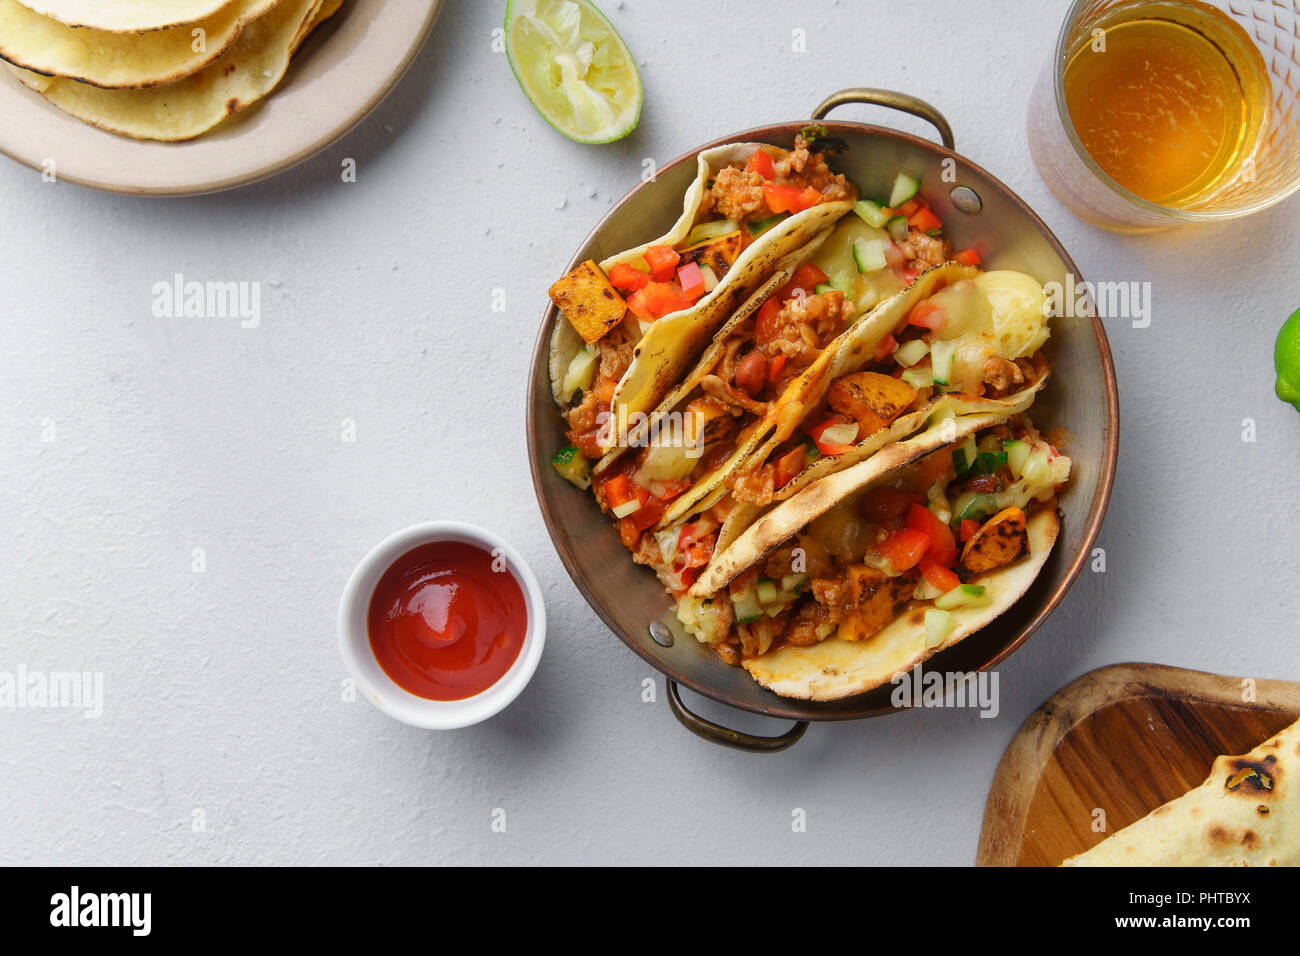 Overhead image of mexican tacos with chili con carne and grated cheese Stock Photo